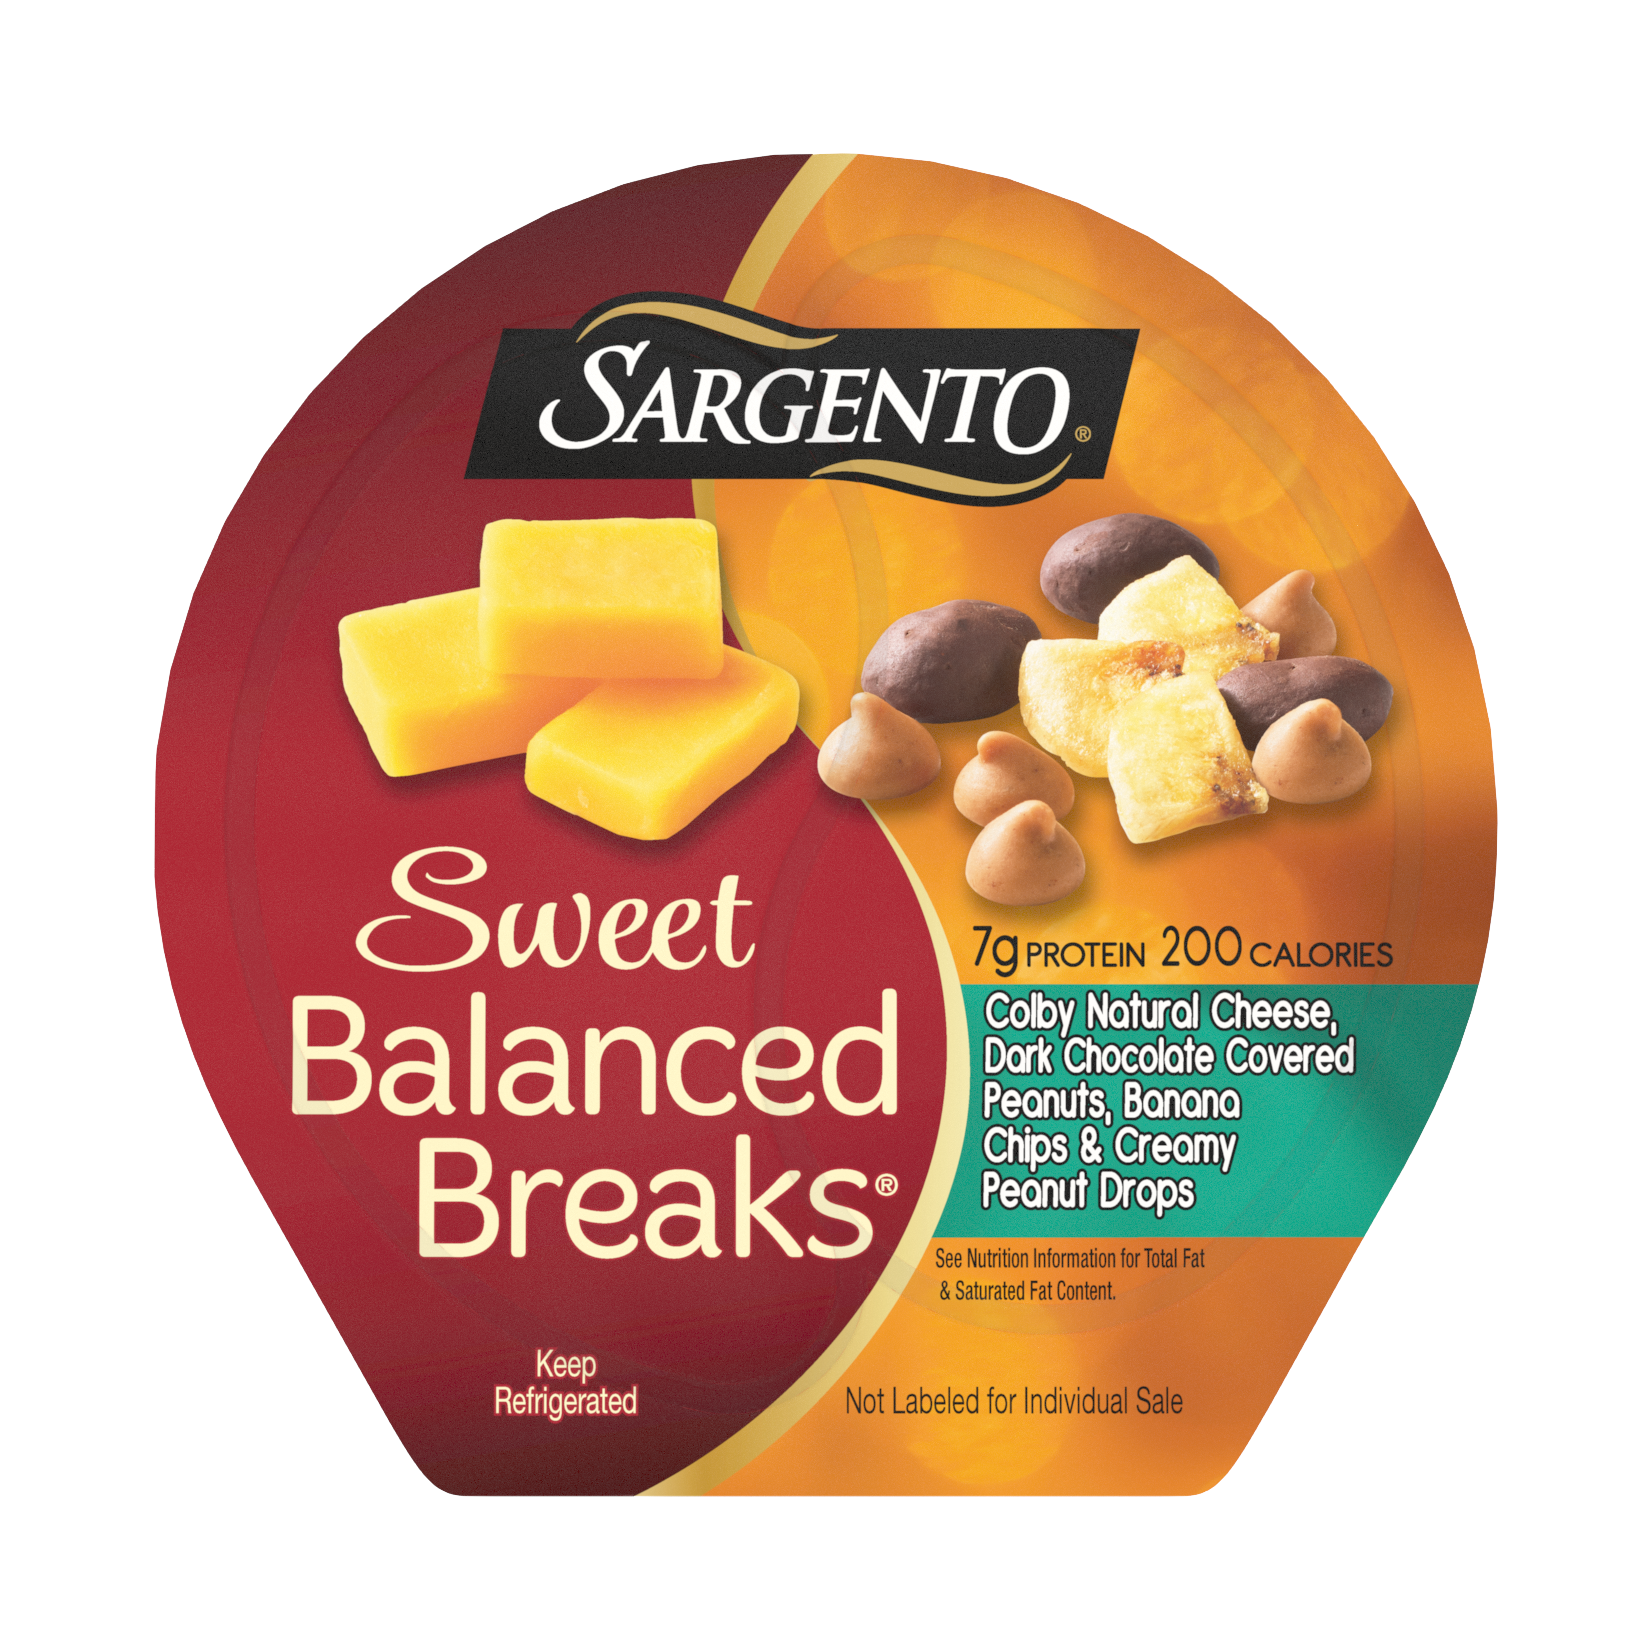 Sargento® Sweet Balanced Breaks®, Colby Natural Cheese, Dark Chocolate Covered Peanuts, Banana Chips and Creamy Peanut Drops